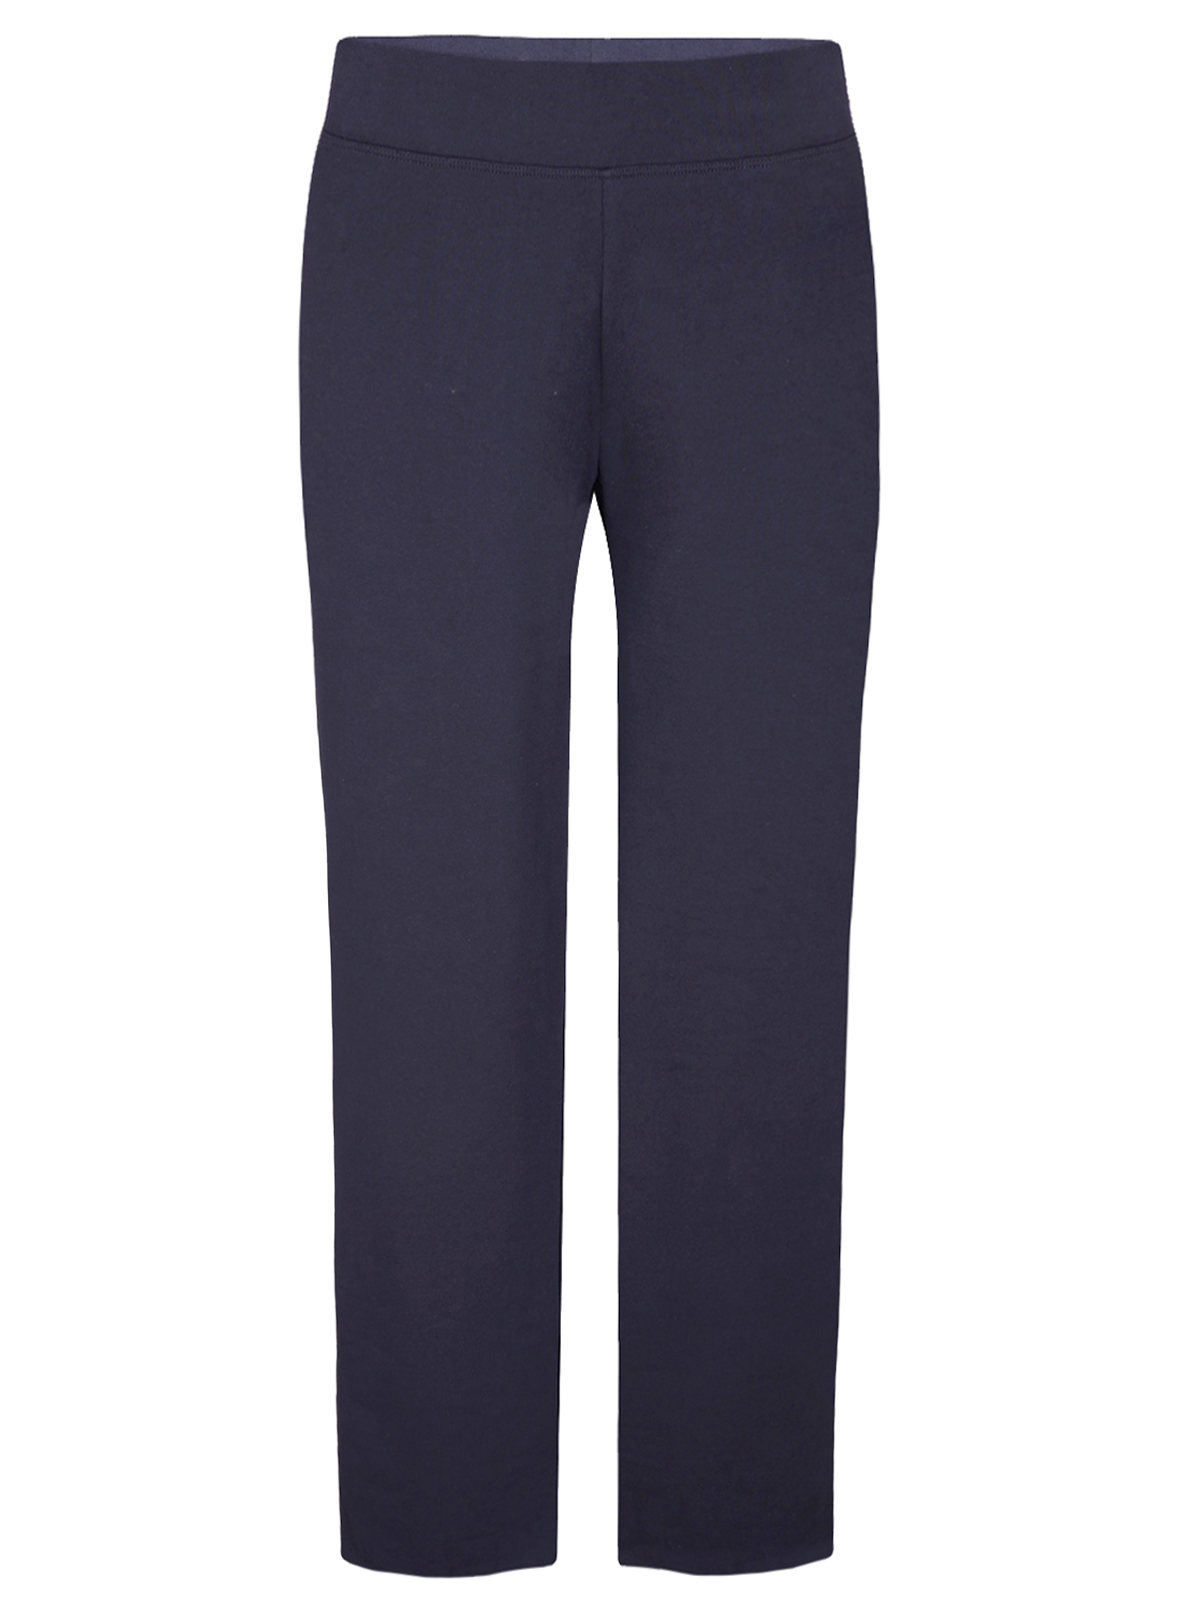 Marks and Spencer - - M&5 NAVY Stretch Cotton Knit Straight-Leg Jogger ...